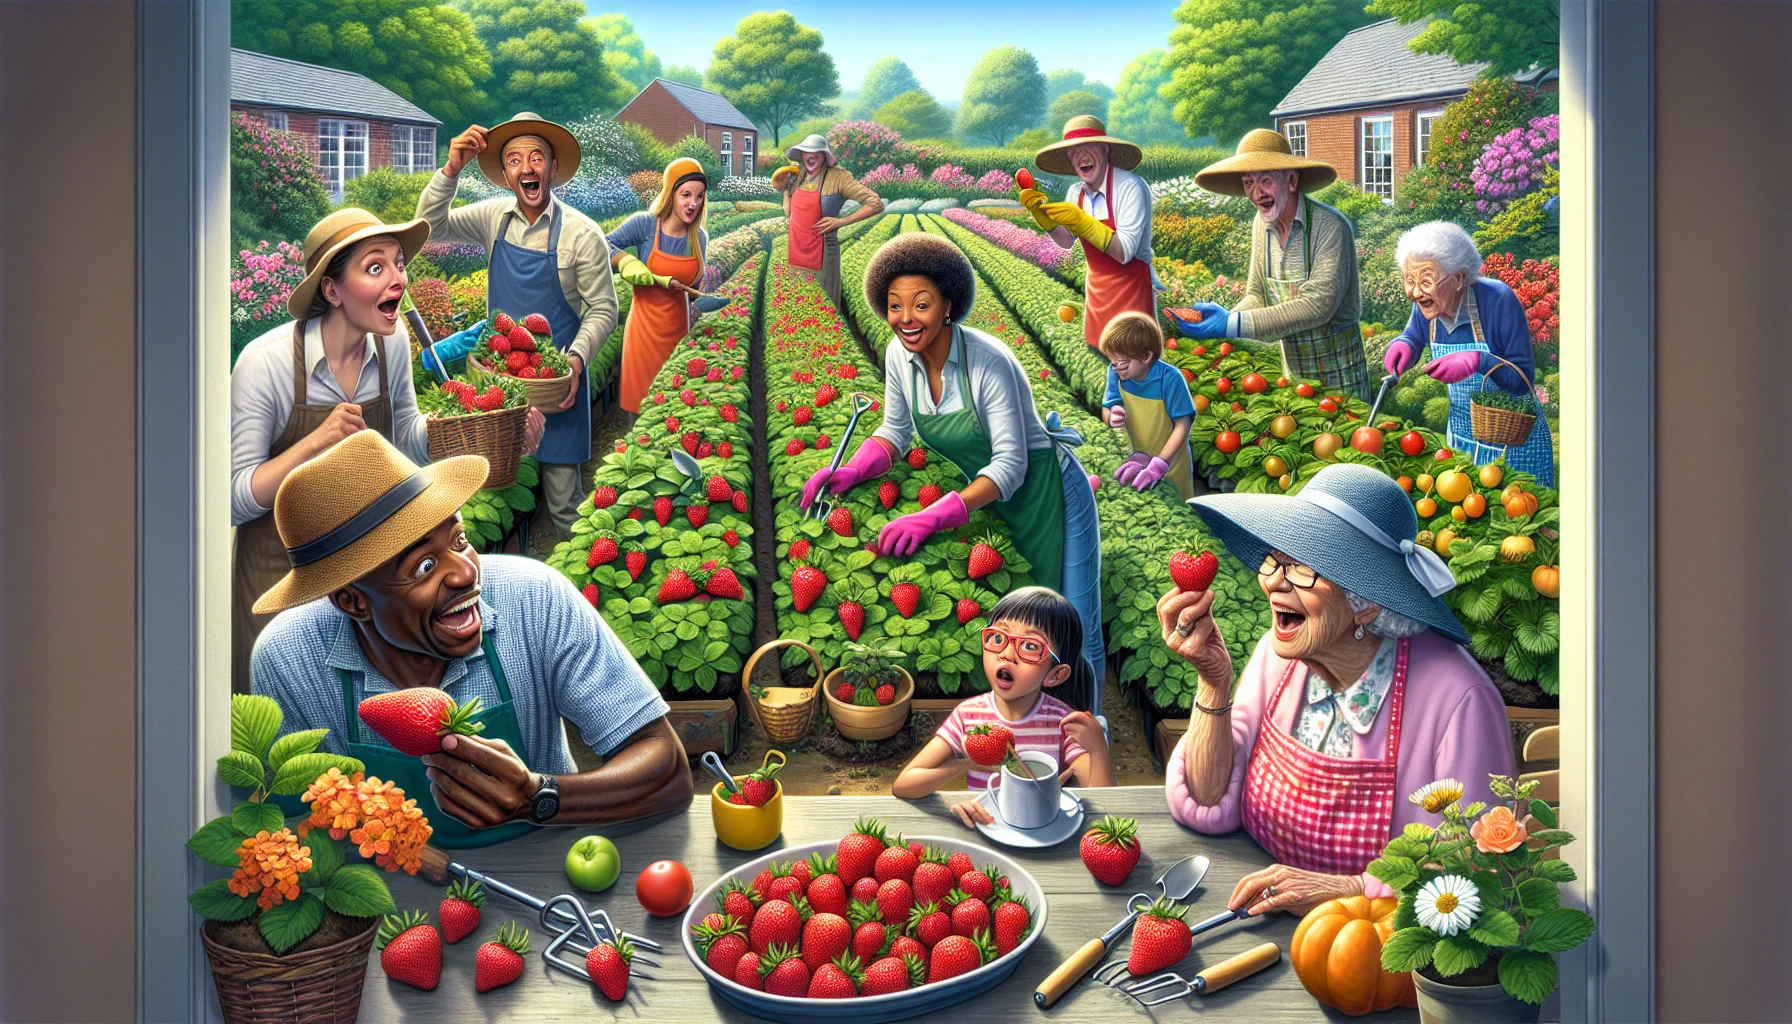 Imagine a humorous gardening scenario where a perfectly common strawberry has been mistakenly recognized as a rare vegetable. This bizarre situation unfolds in an idyllic garden, surrounded by an array of beautiful flowers, flourishing greenery, and various other fruits and vegetables. People of different descents, including a Caucasian man, a Black woman, a South Asian child, and a Hispanic elderly lady enthusiastically attend to the plants in their sun hats and colorful aprons, each of them holding different gardening tools. Their expressions of surprise, perplexity, and laughter emphasize the amusing mood. This scene encourages onlookers to enjoy the charm and unexpected humor of gardening.